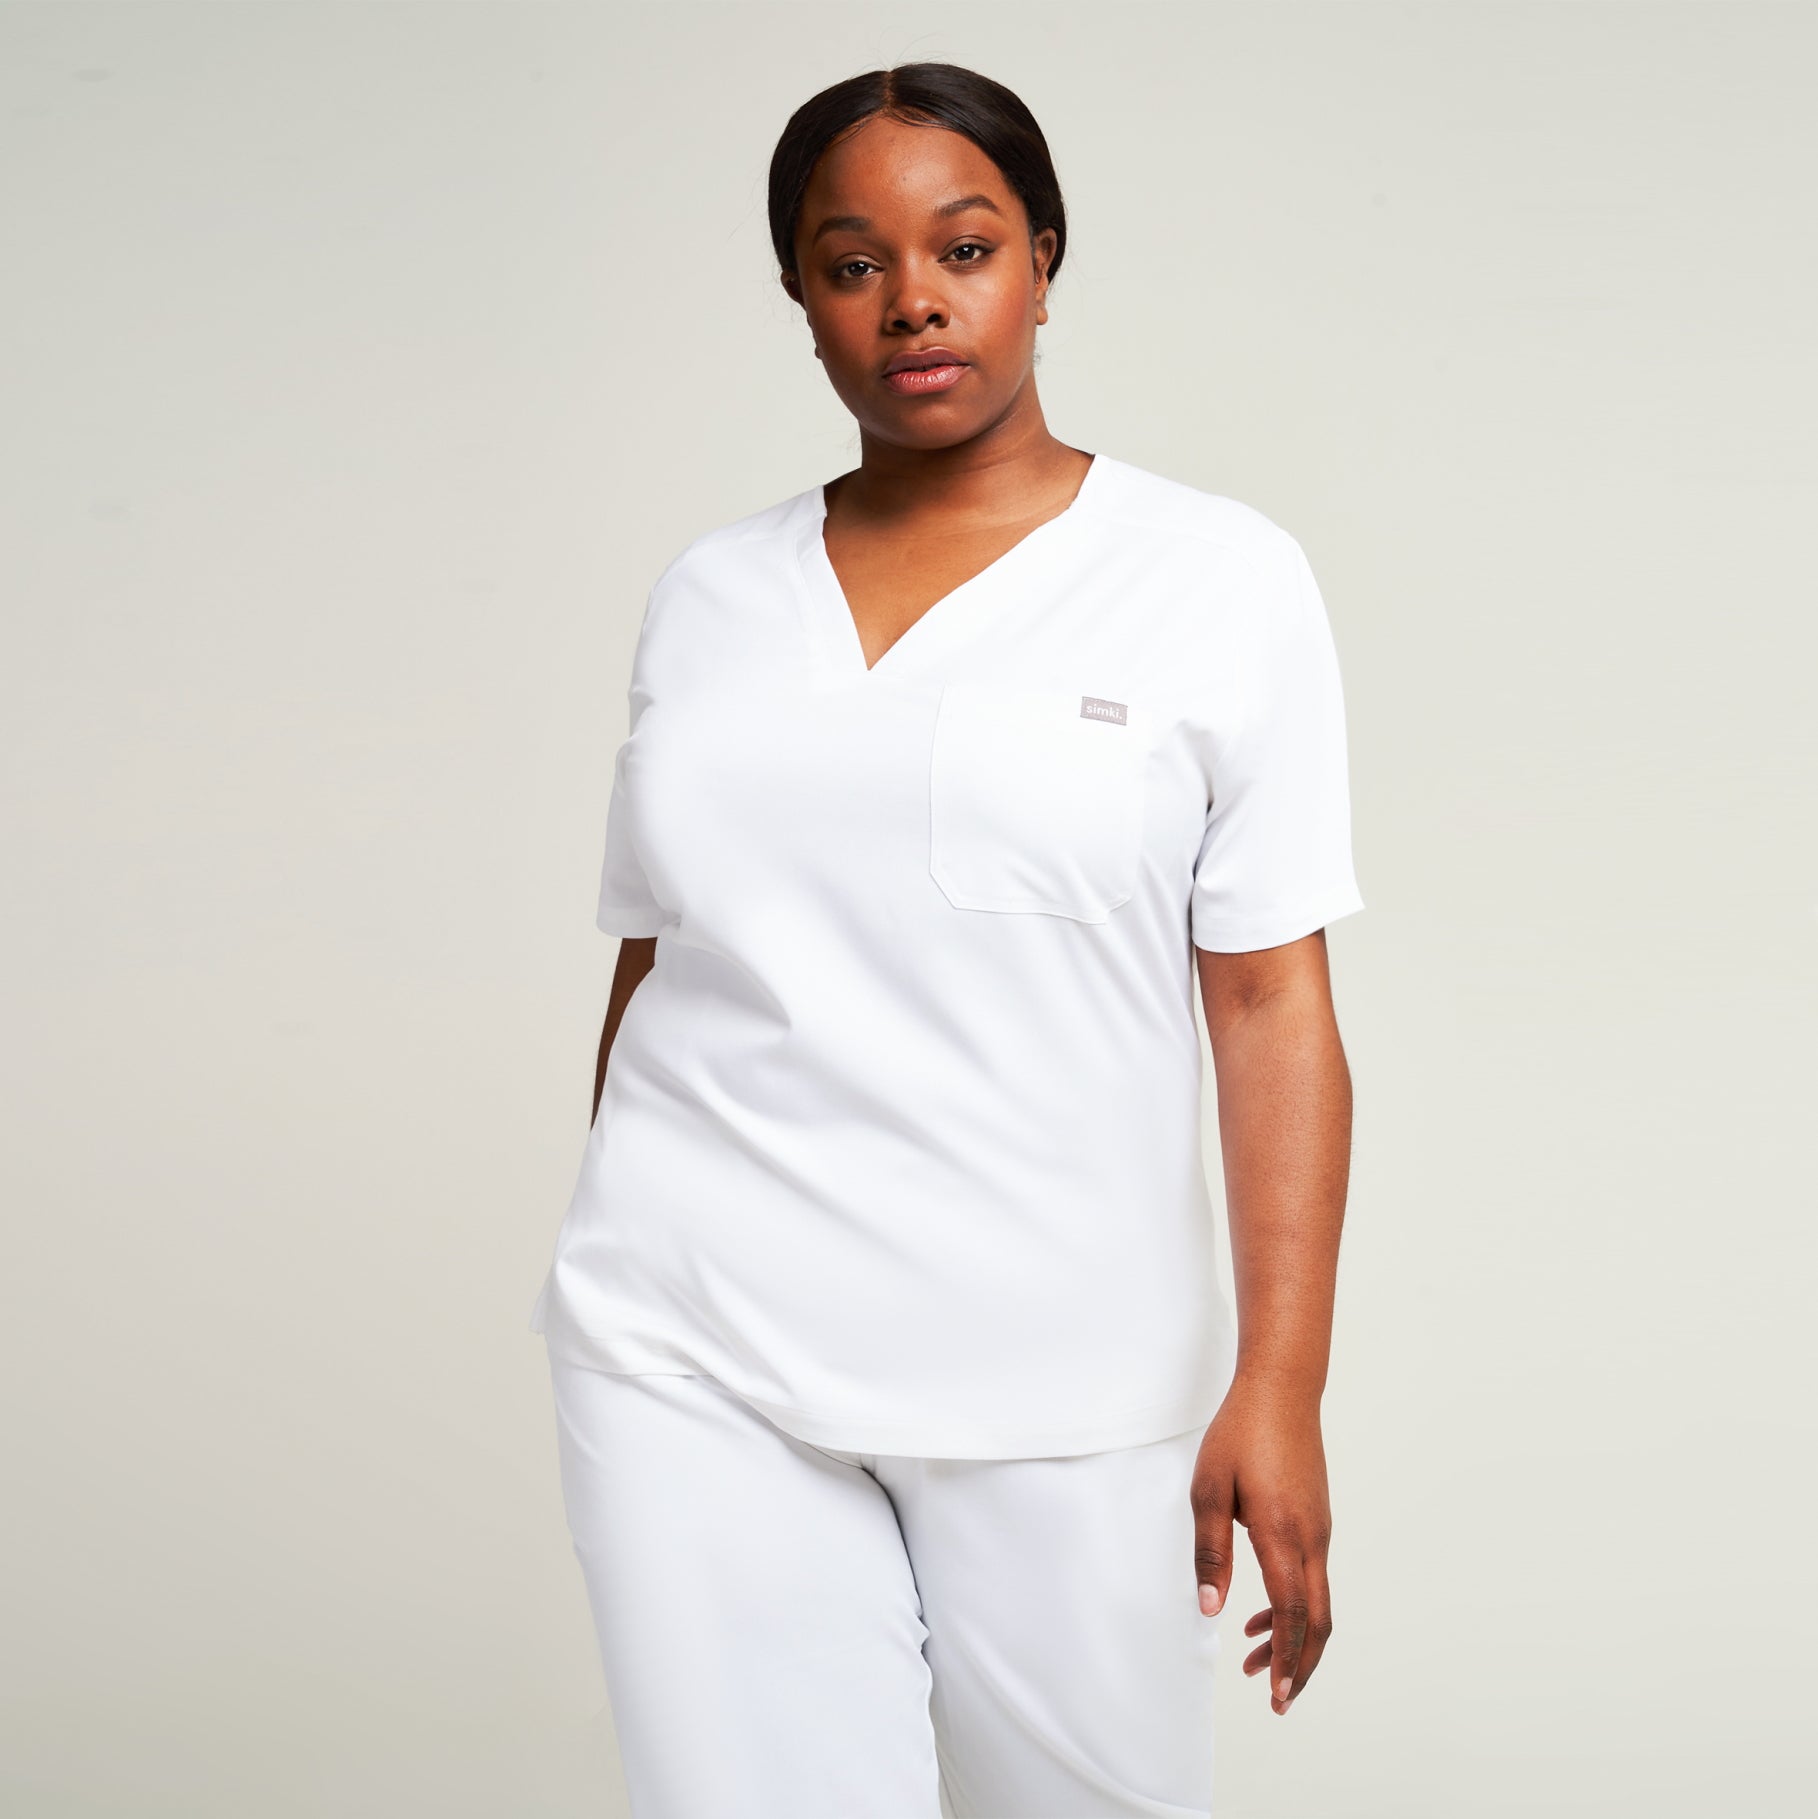 The Asymmetric Top - White  Medical scrubs outfit, Medical outfit